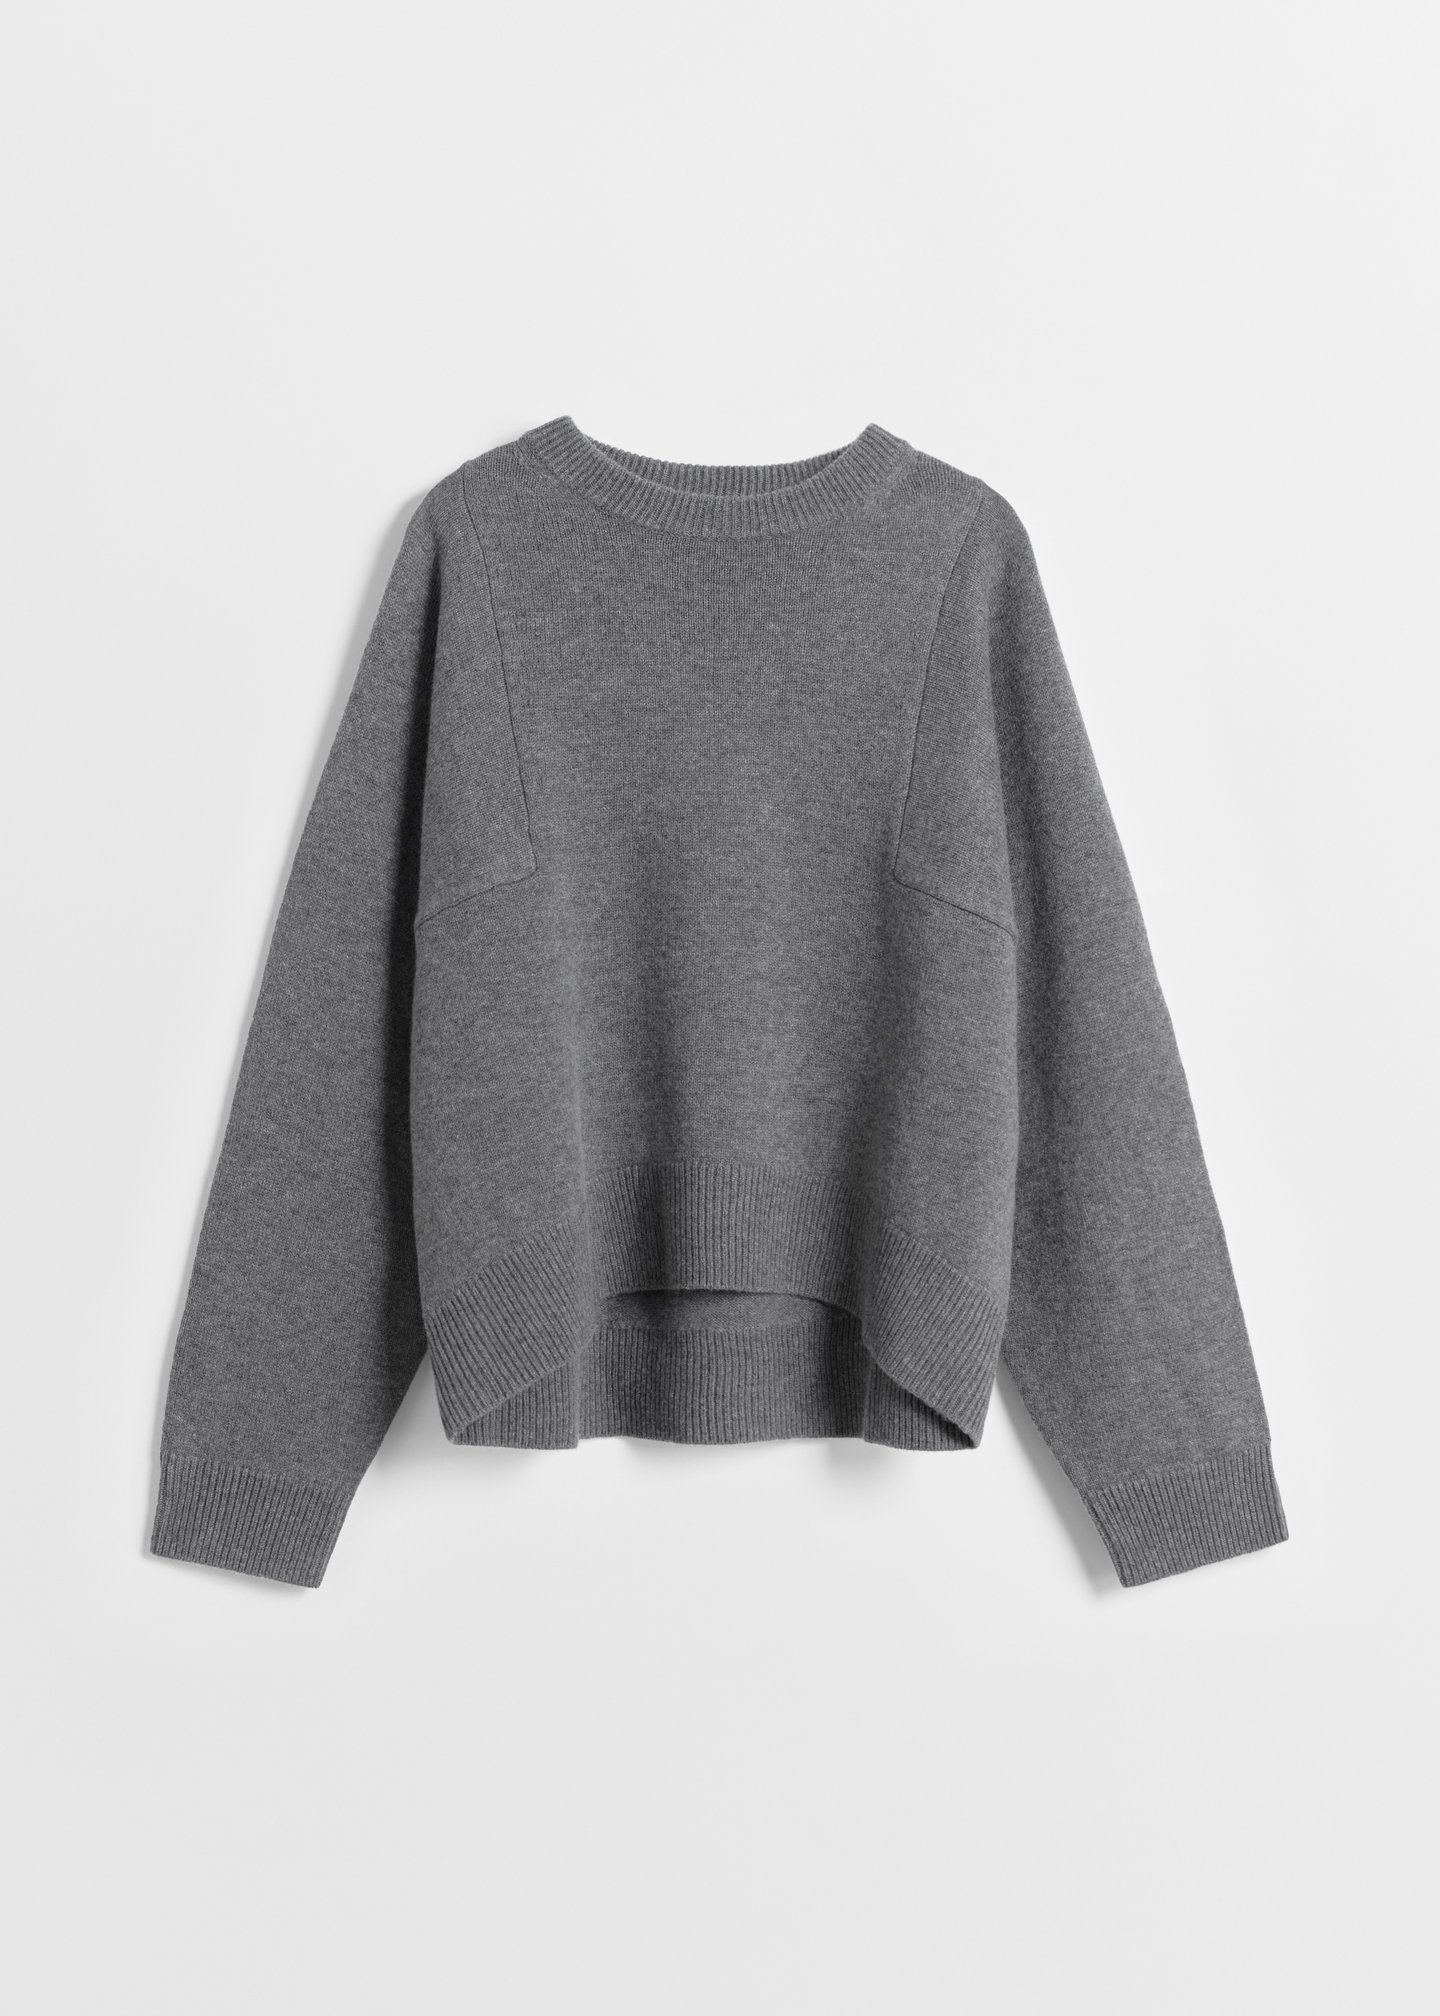 CO - Crew Neck Sweater in Wool Cashmere - Grey